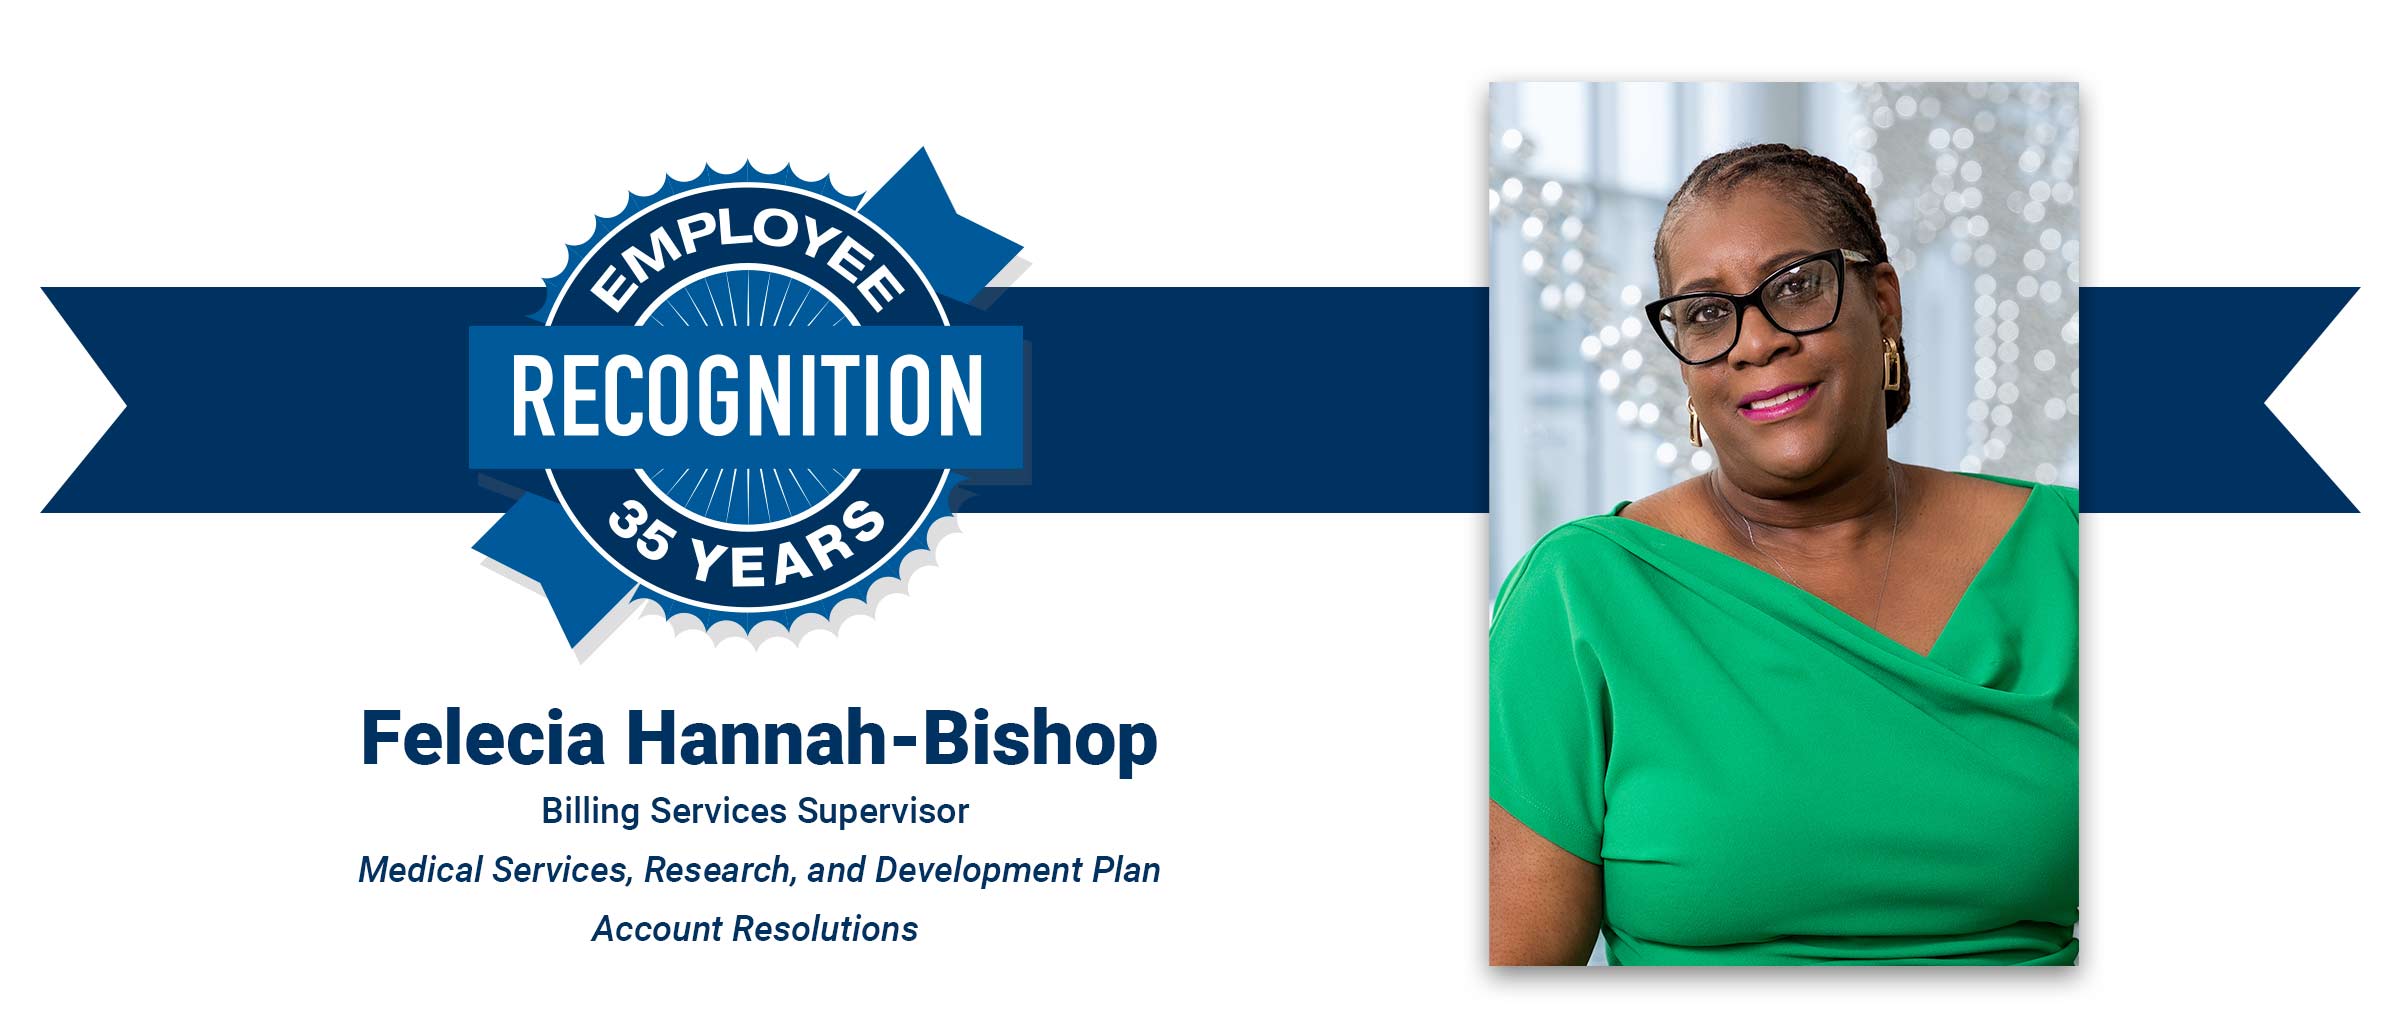 Woman with braids, black glasses, green top. Felecia Hannah Bishop, 35 years employee recognition.